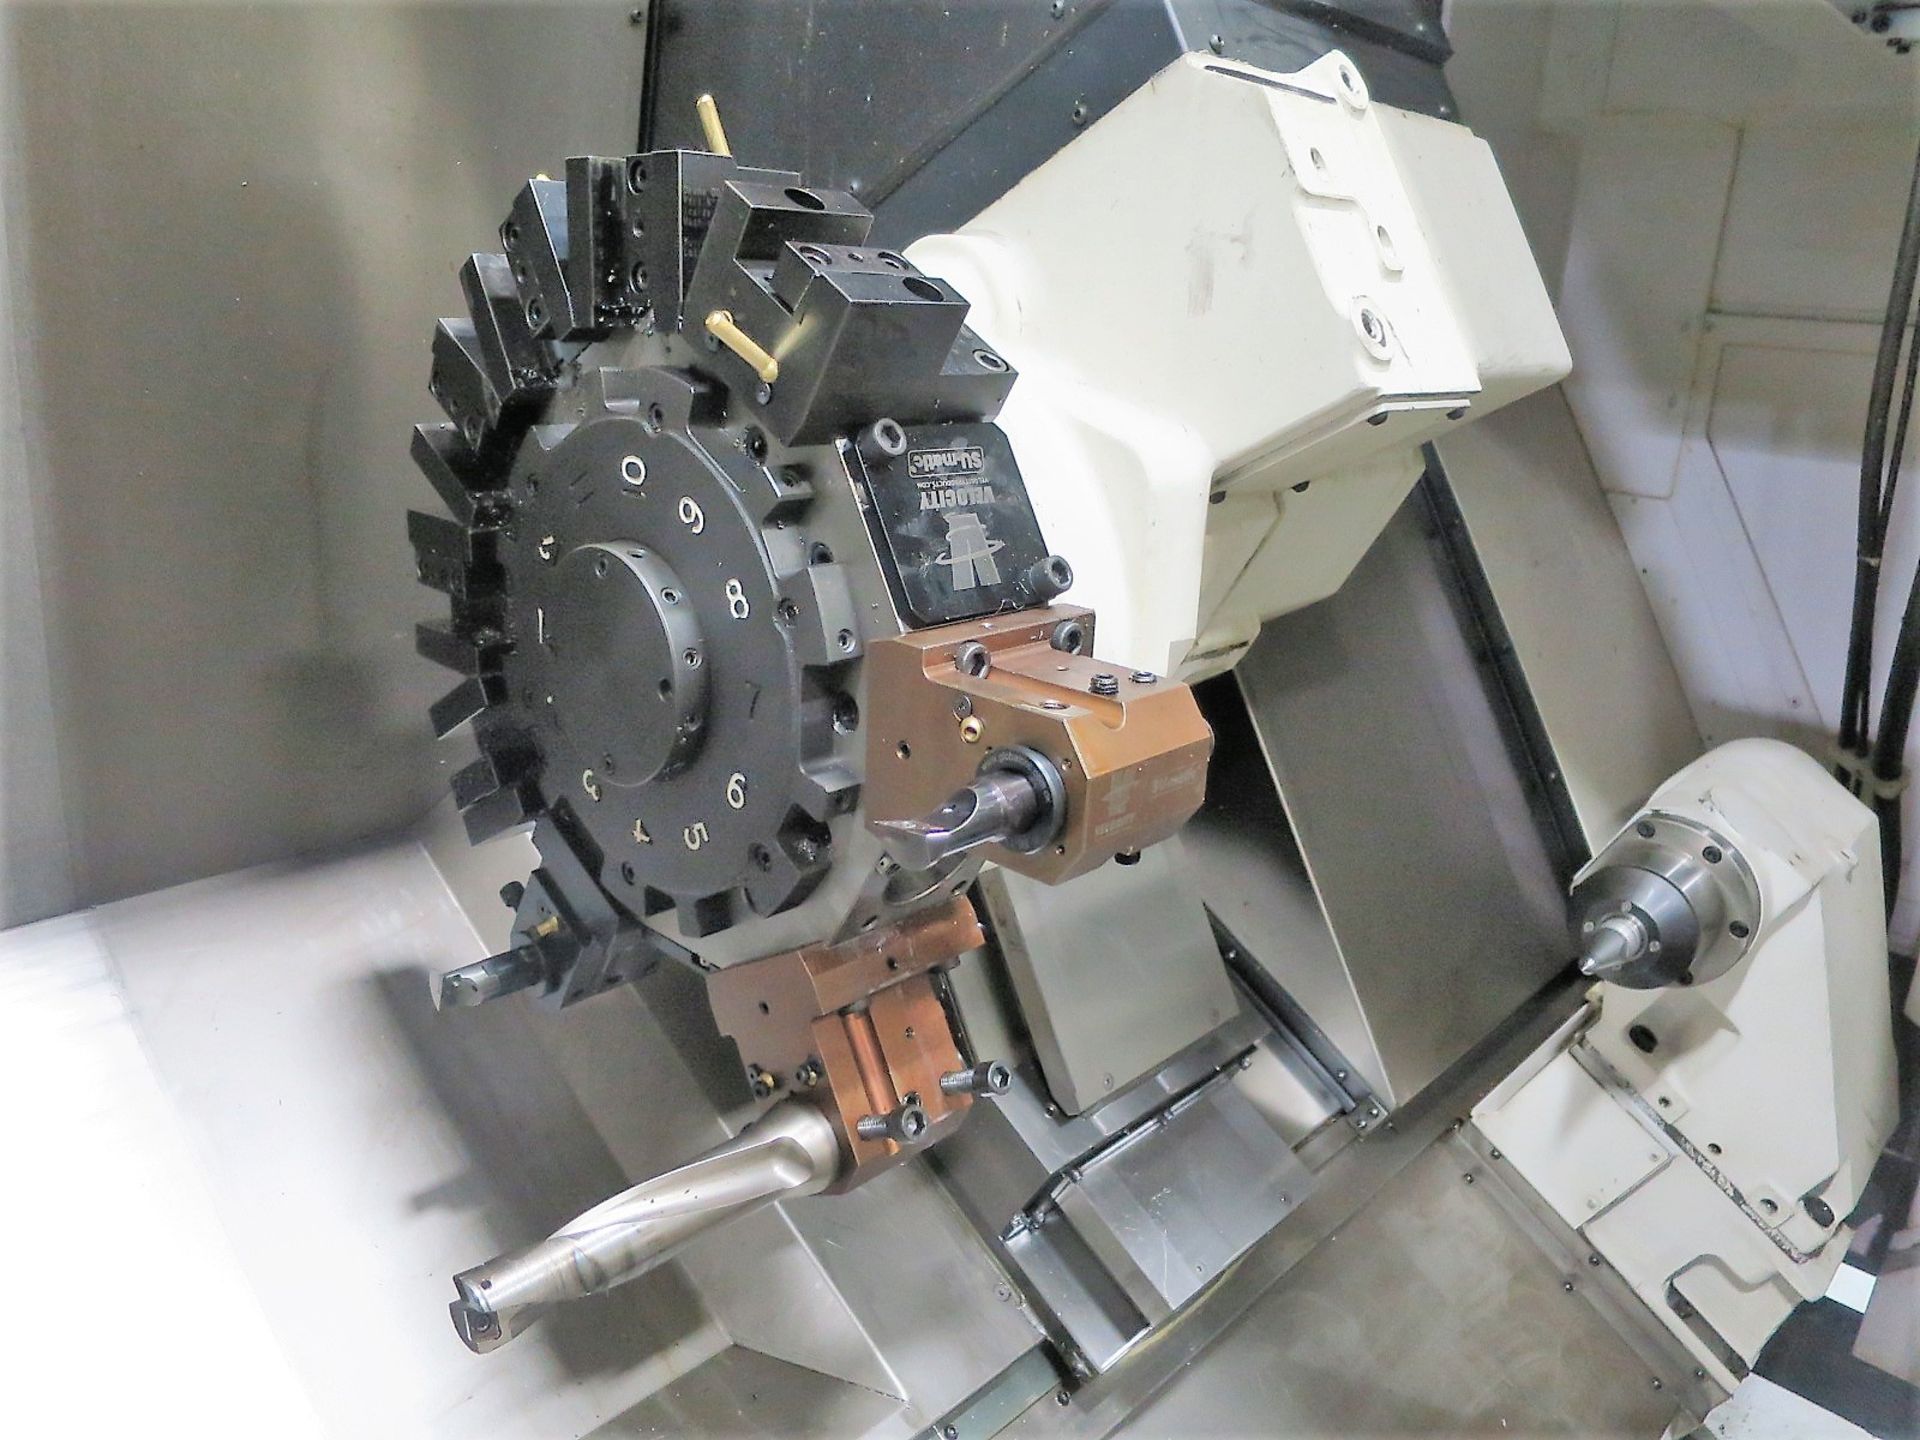 Okuma LB3000EXII MY BB 950 CNC Turning Center Lathe W/Live Tooling & Y-Axis Milling, S/N 206472, - Image 5 of 12